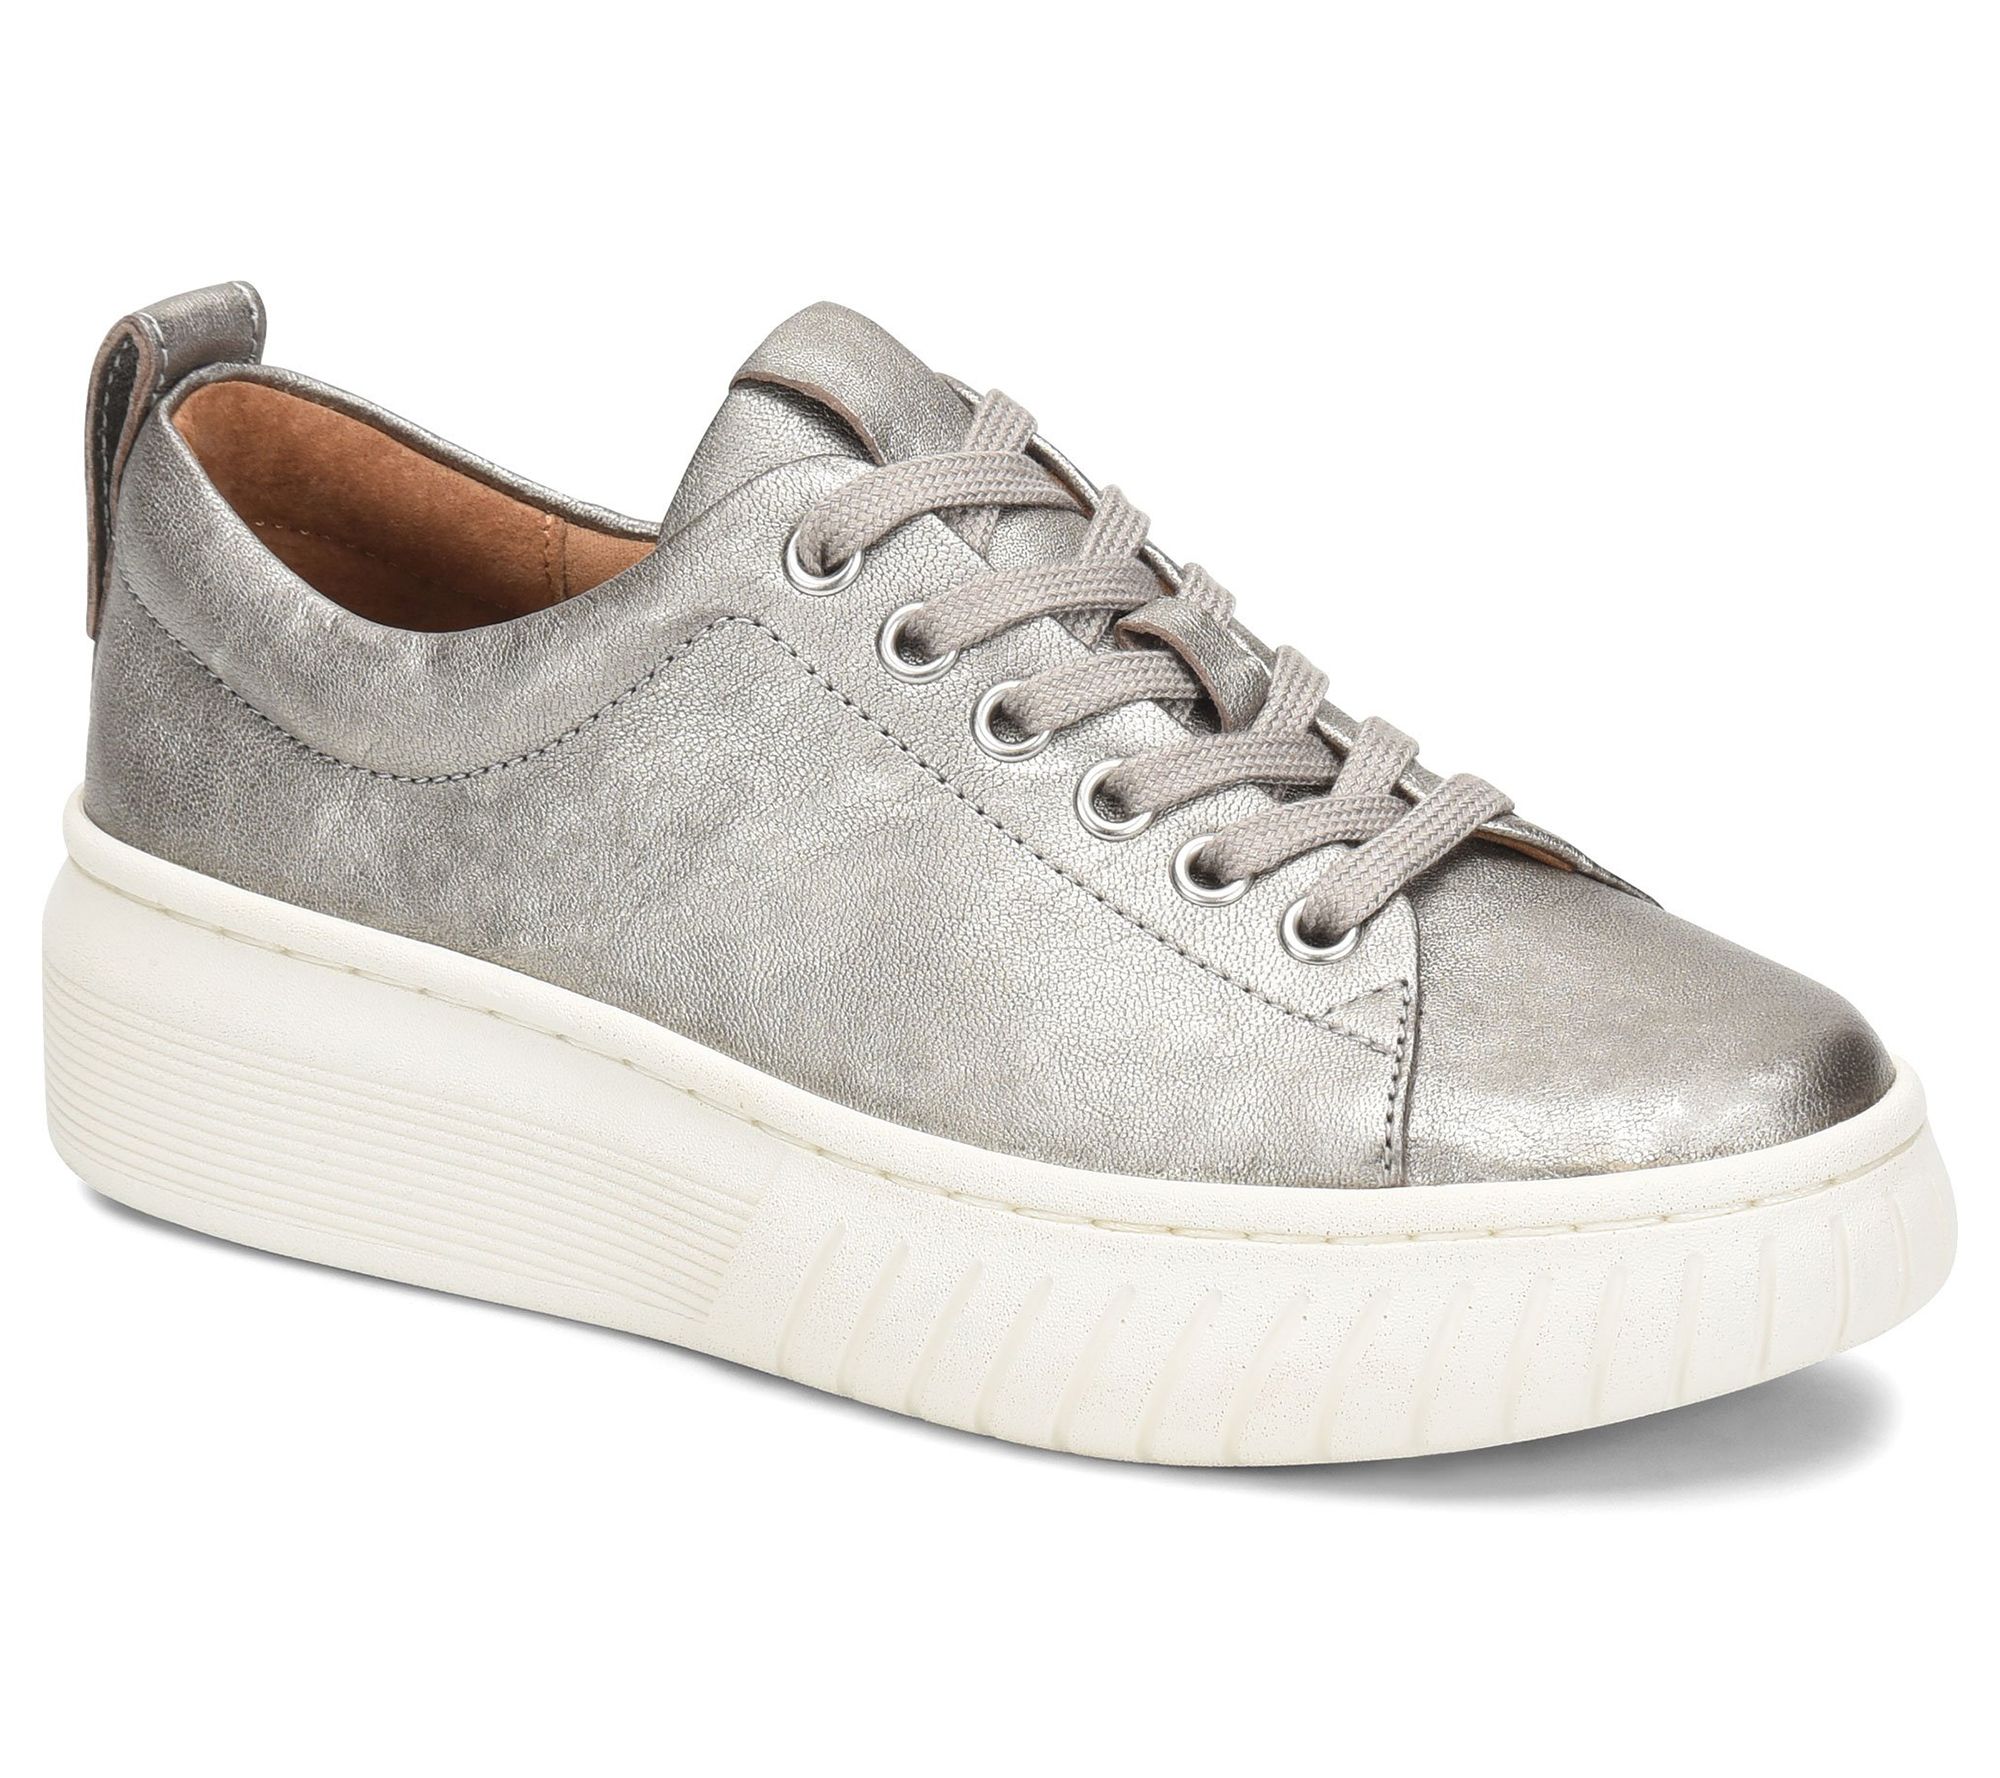 Sofft Leather Metallic Sporty Sneakers 